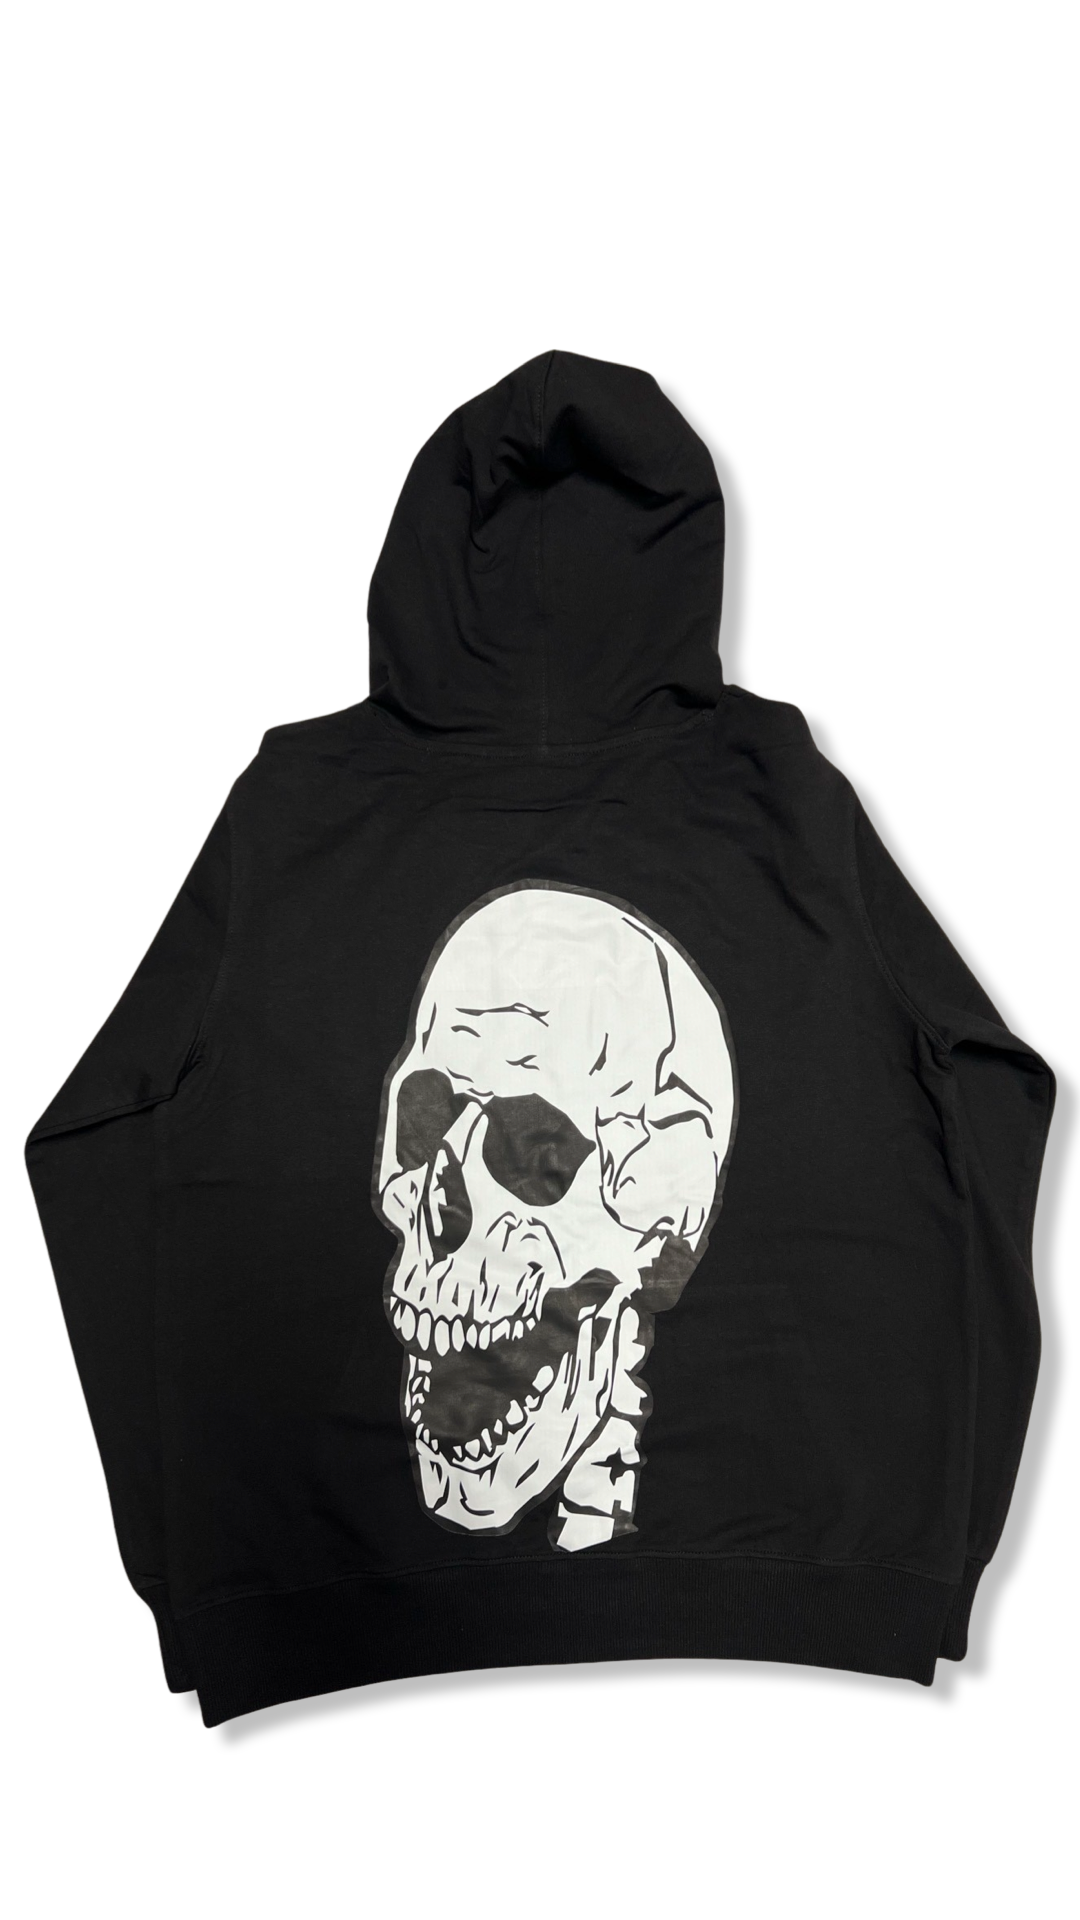 (Szn2) (Black) fitted workout hoodie